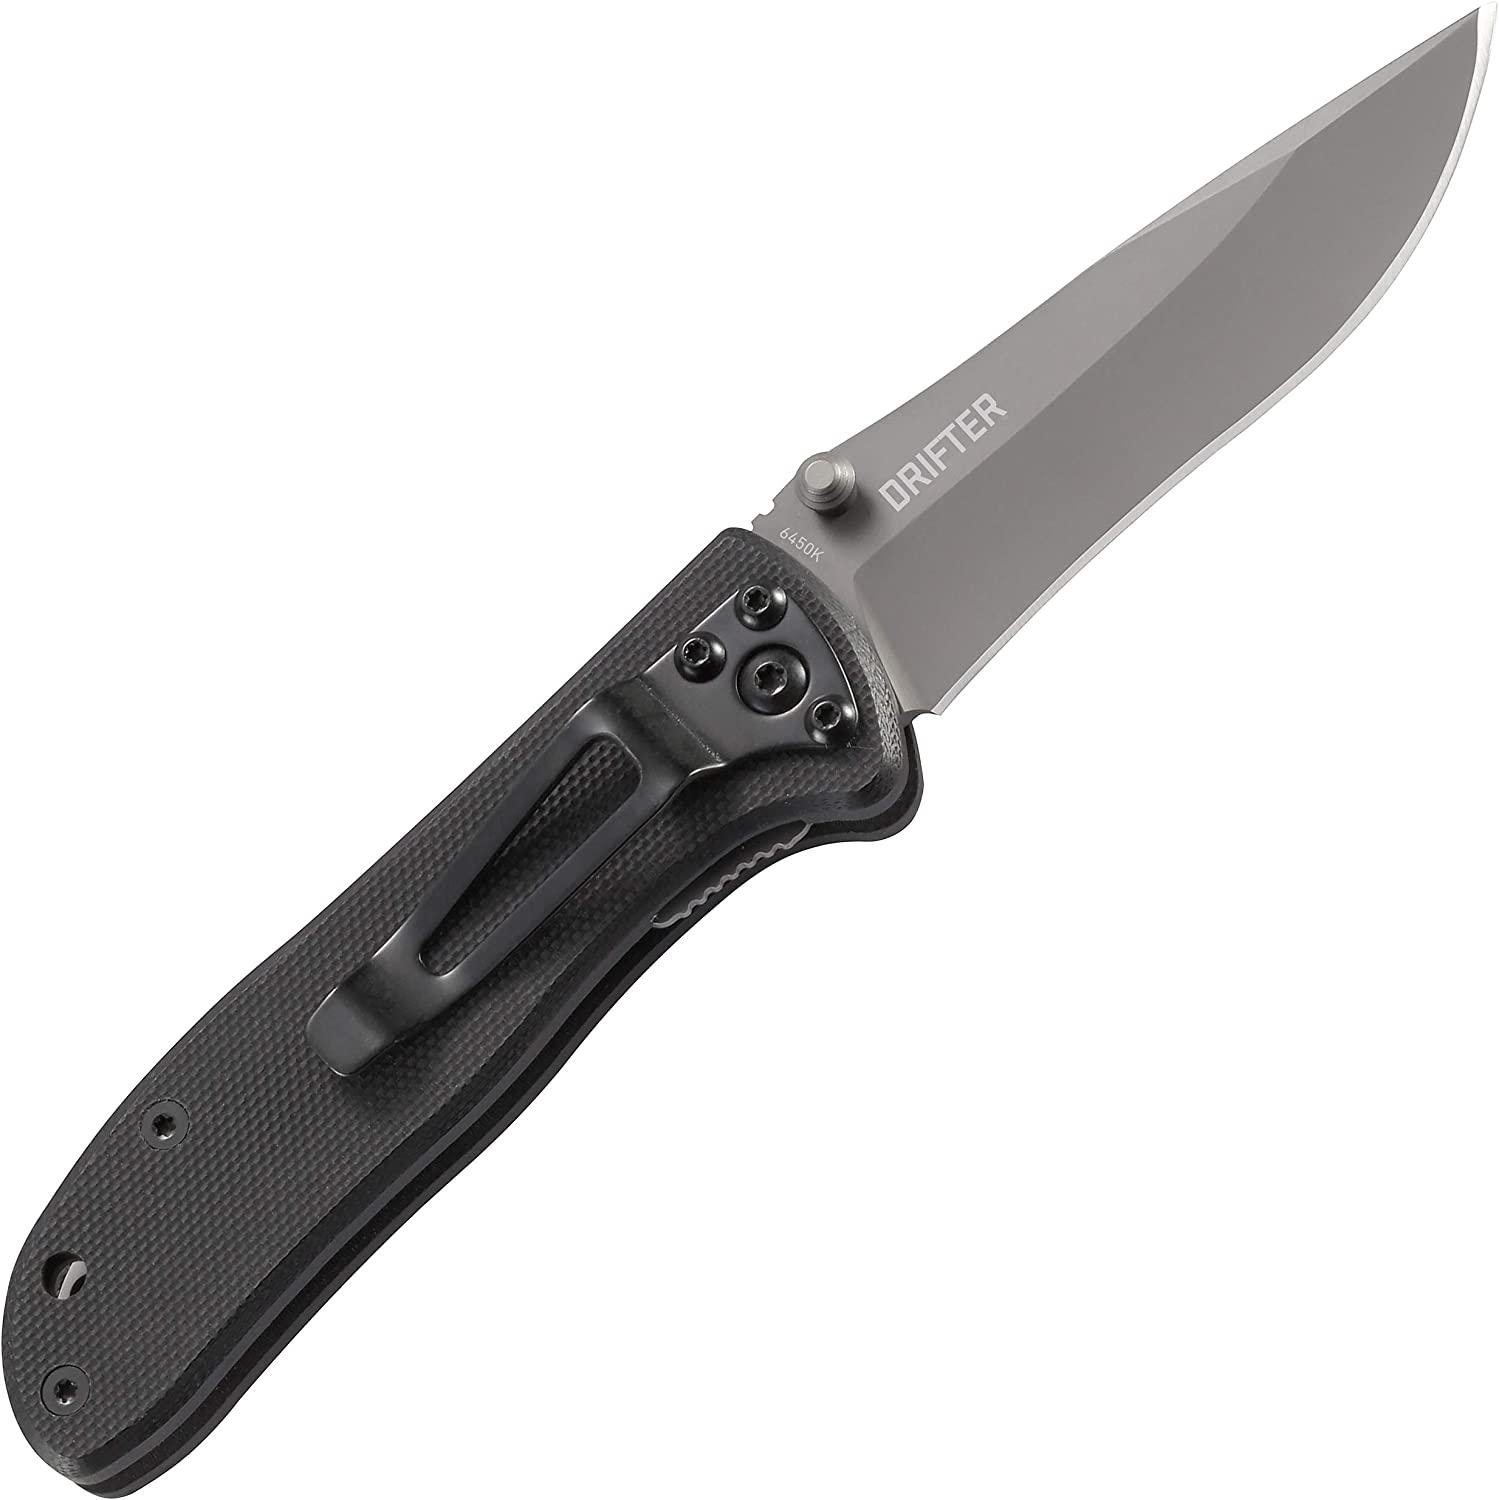 Drifter Black W/G10 Handle - Purpose-Built / Home of the Trades